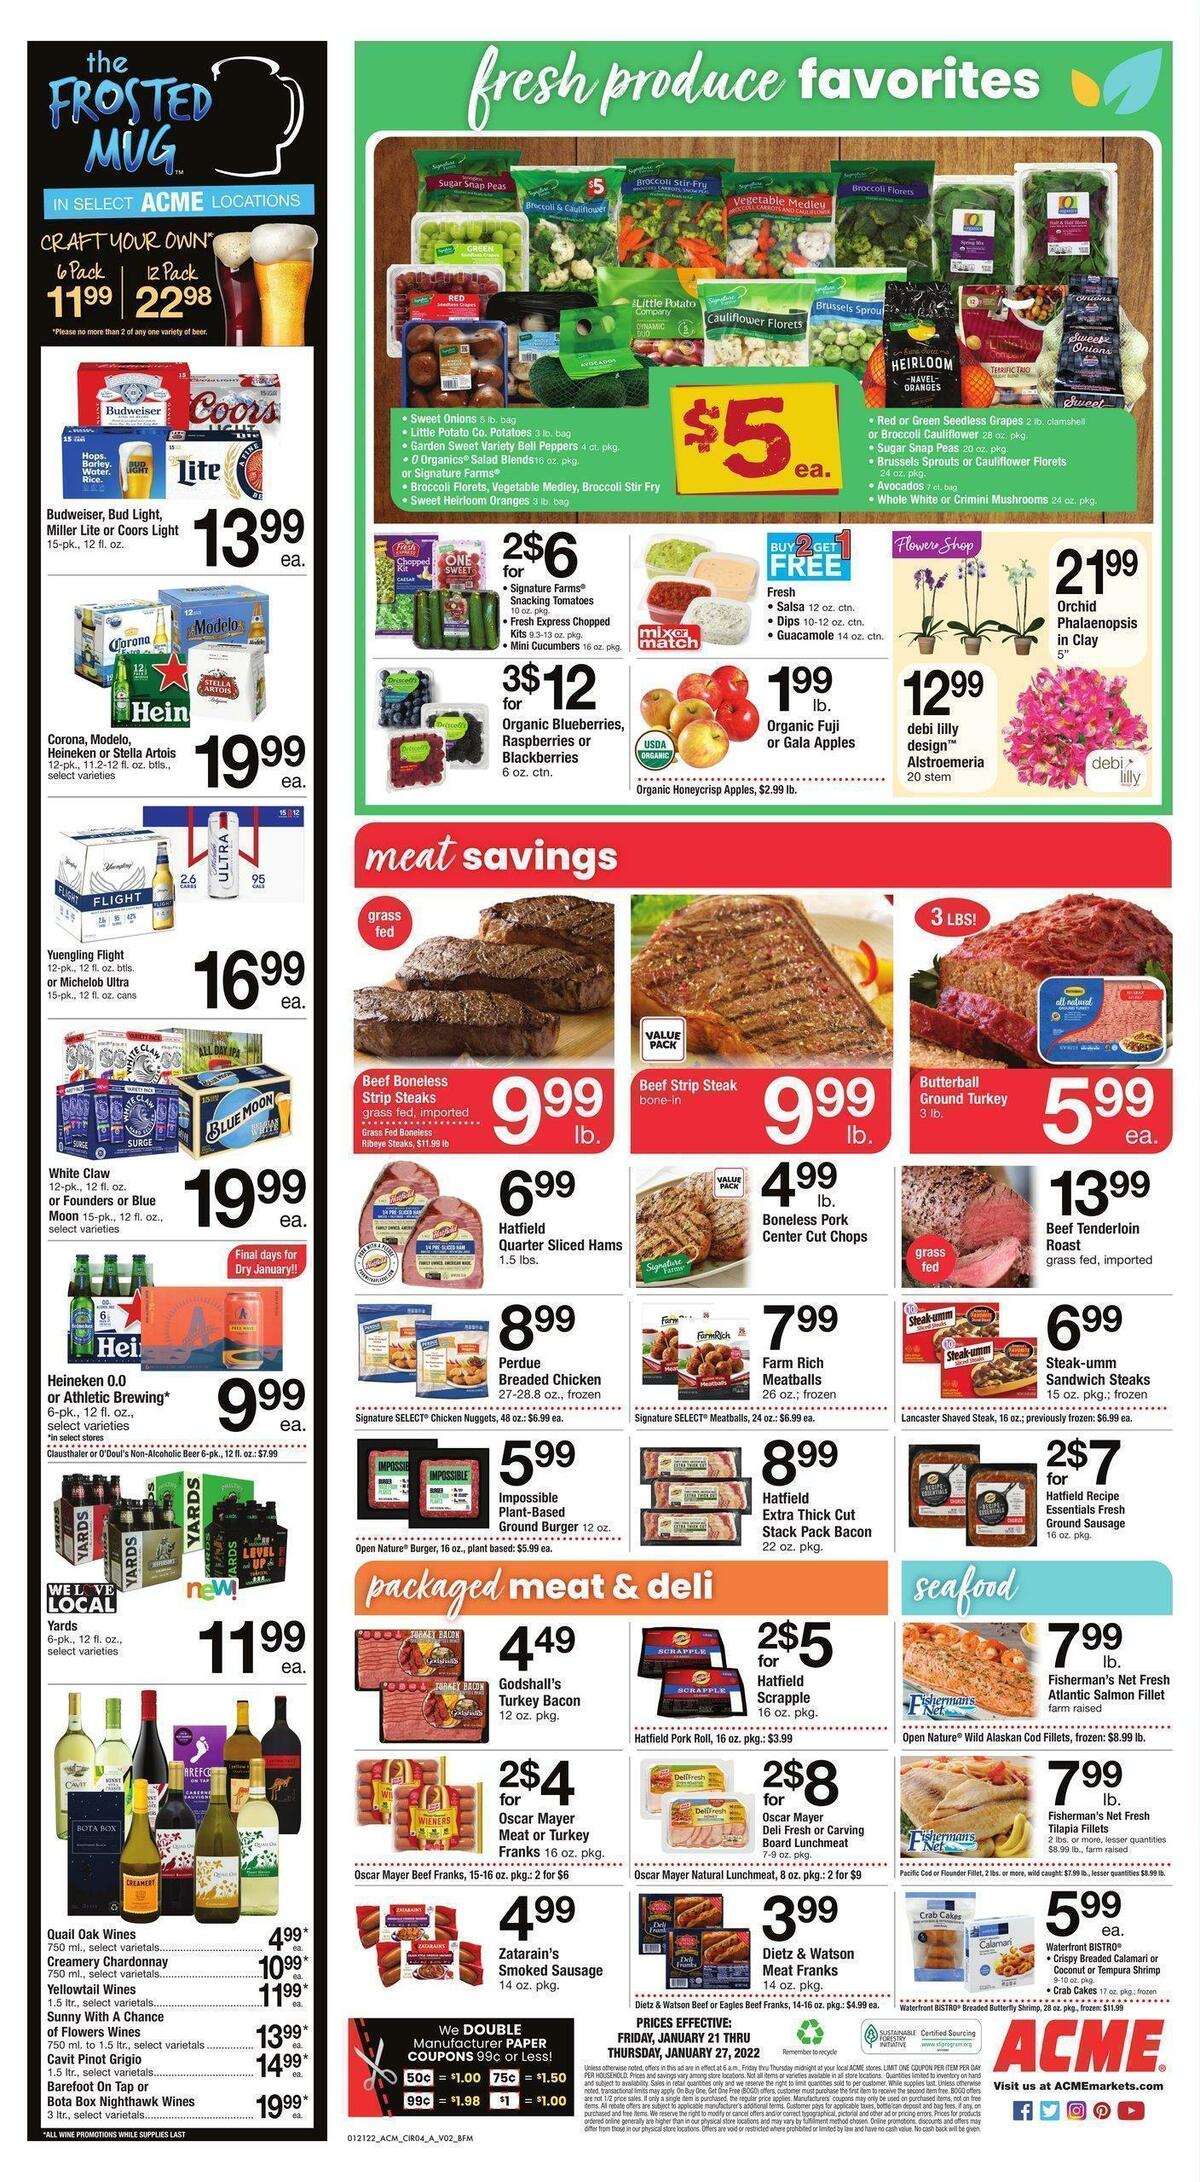 ACME Markets Weekly Ad from January 21